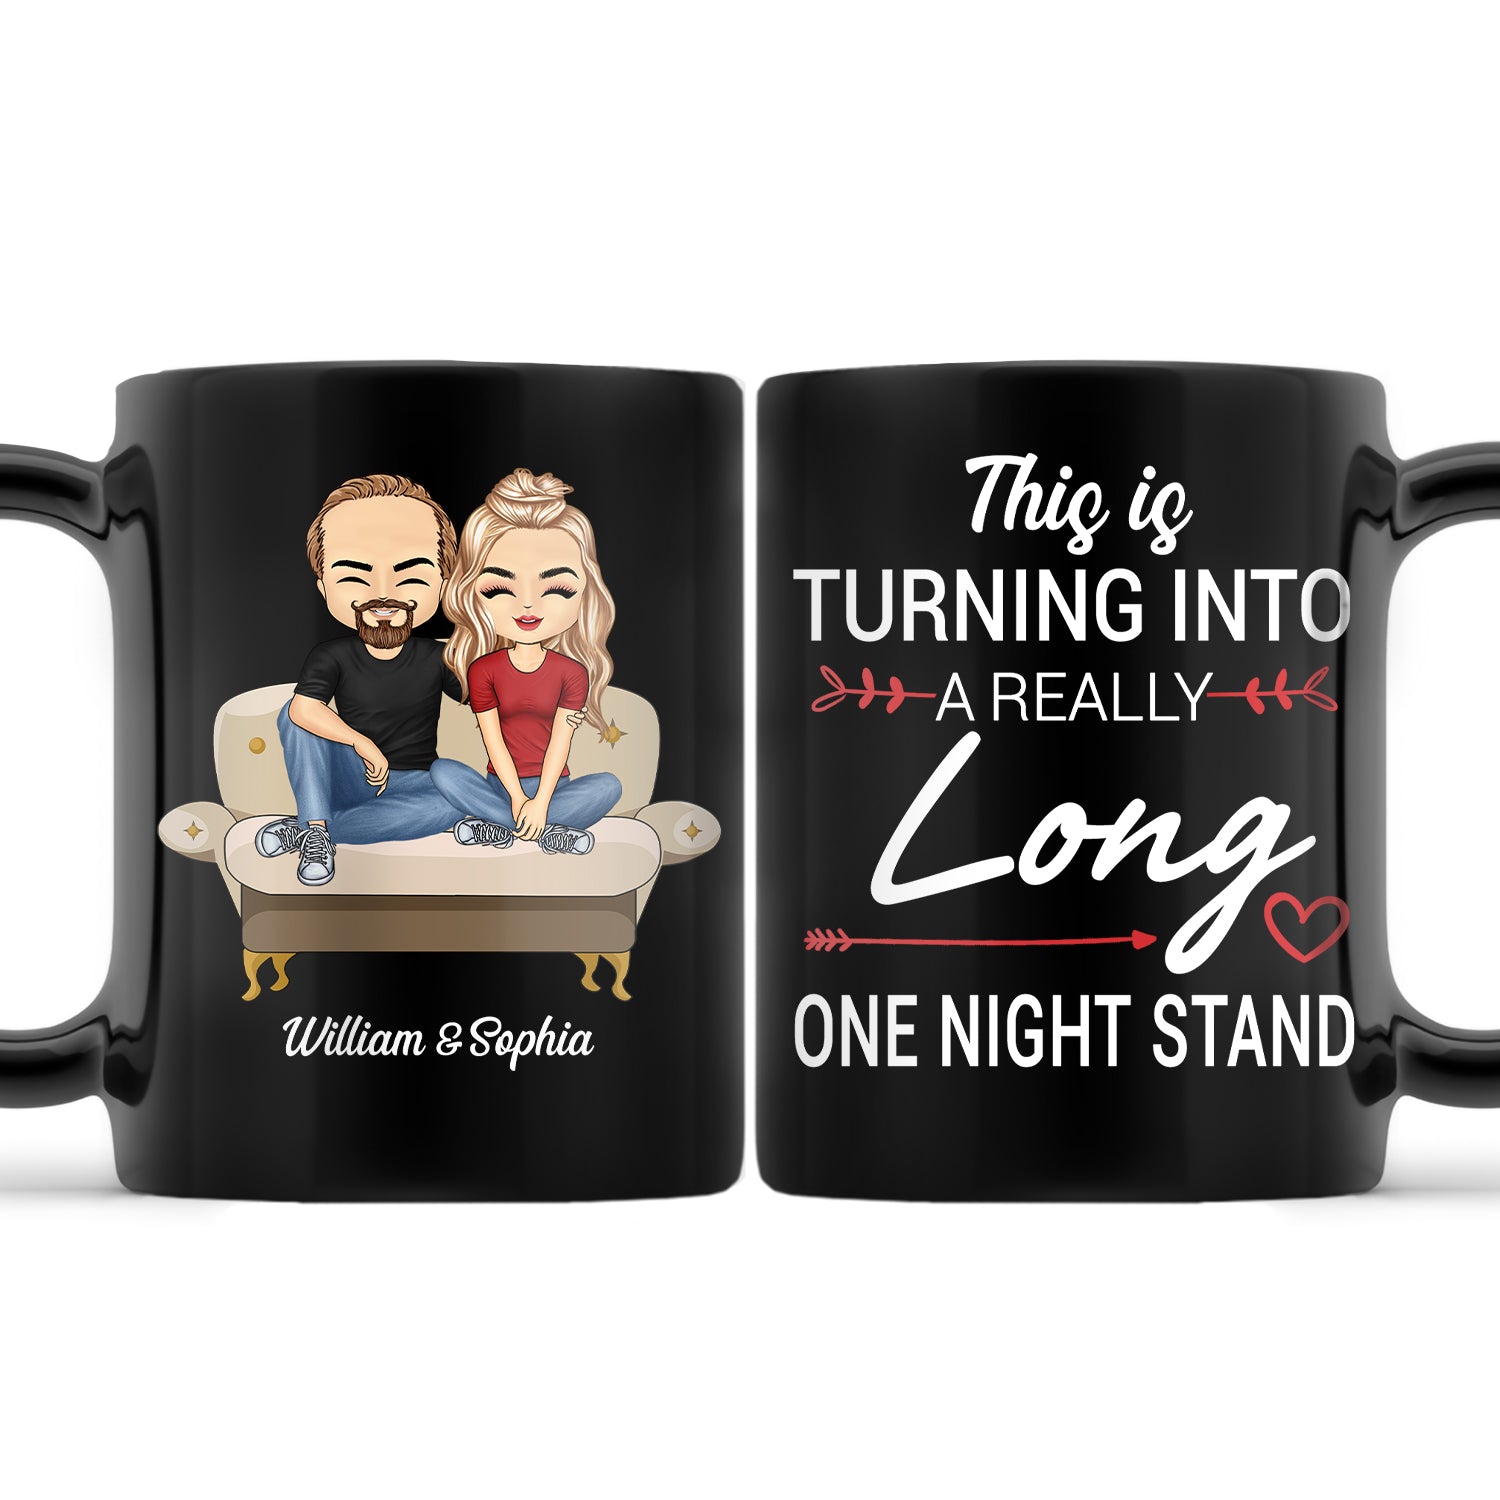 This Is Turning Into A Really Long One Night Stand - Funny, Birthday, Anniversary Gift For Spouse, Couple, Husband, Wife - Personalized Mug